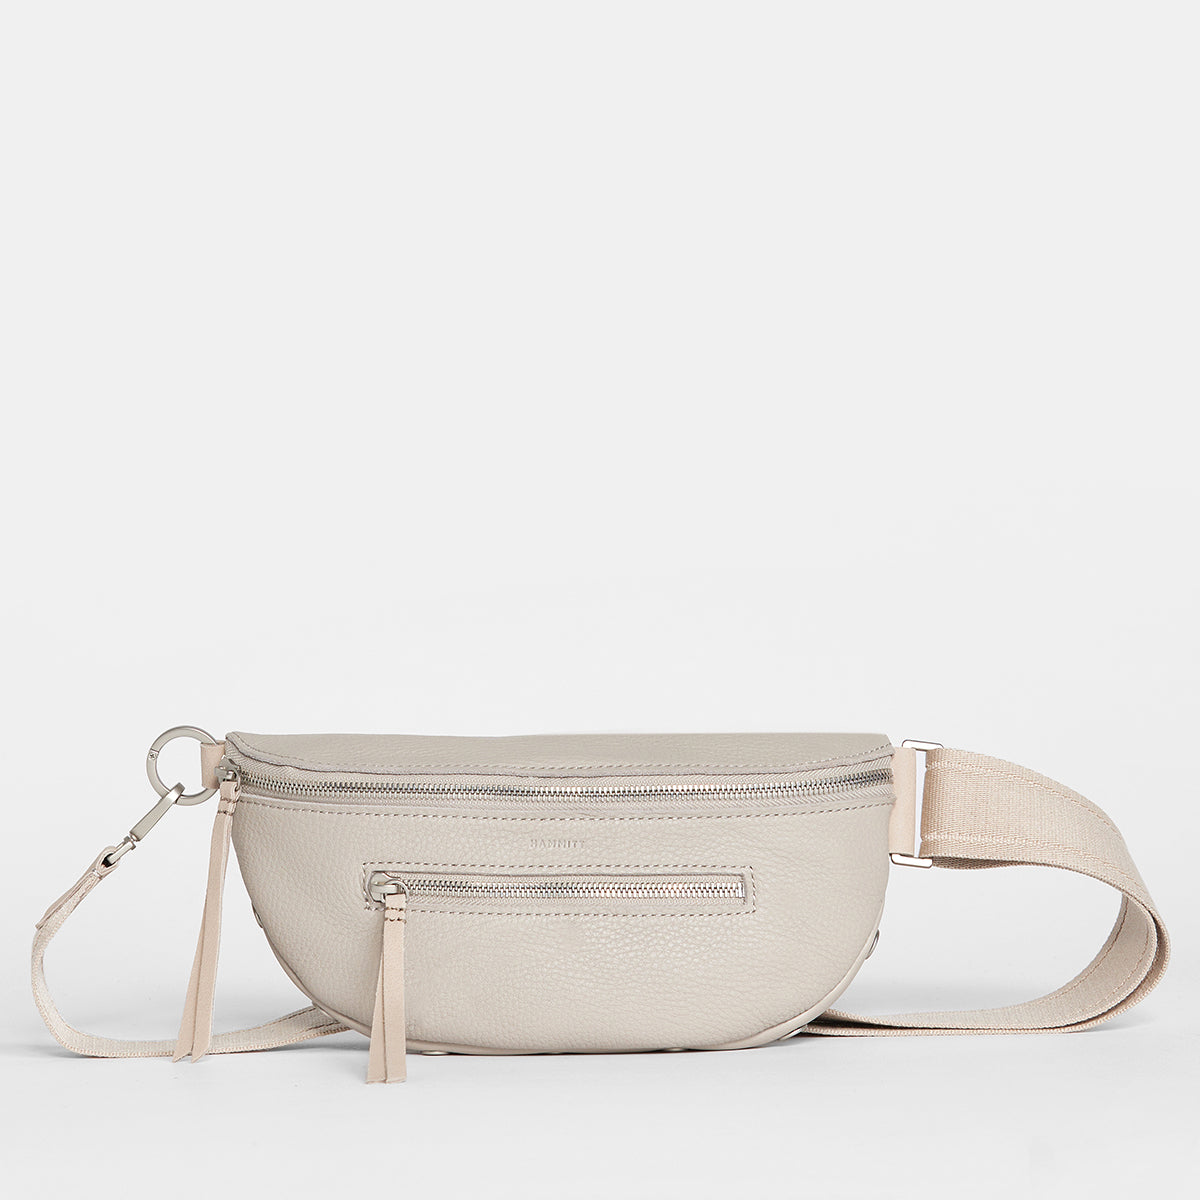 Charles-Crossbody-Paved-Grey-Front-View